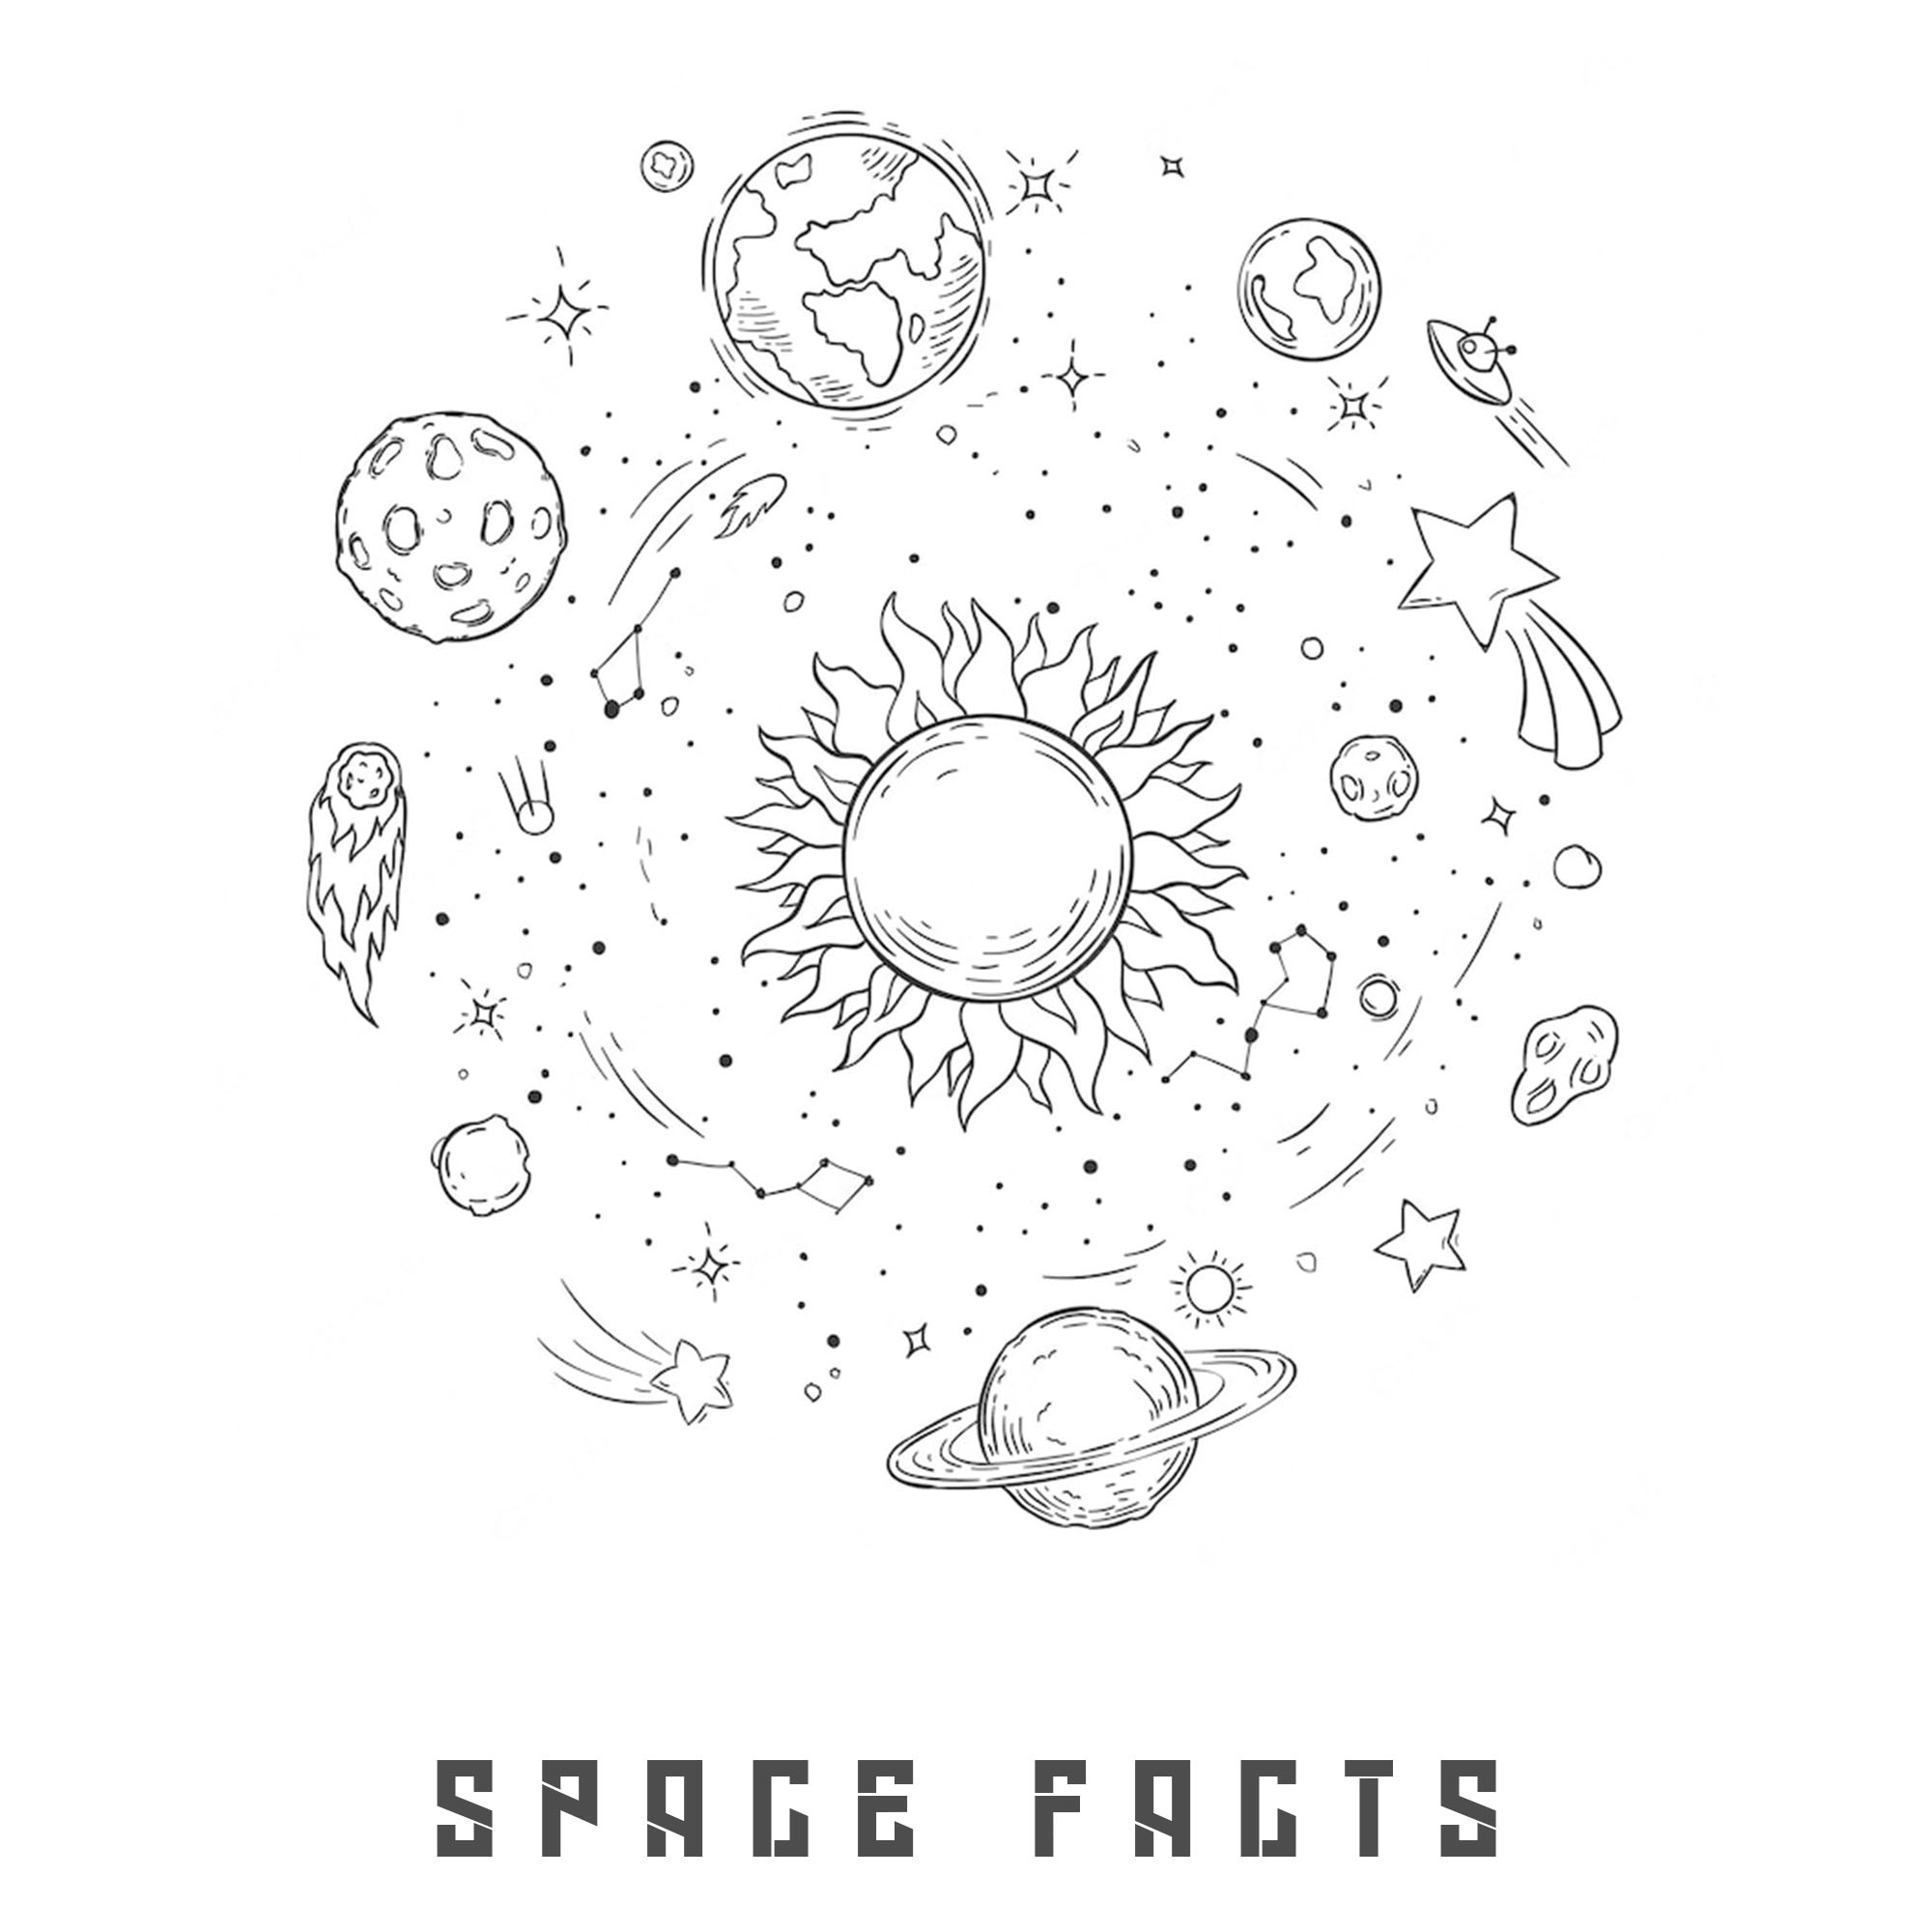 space-facts-interesting-and-fun-facts-about-space-facts-from-space